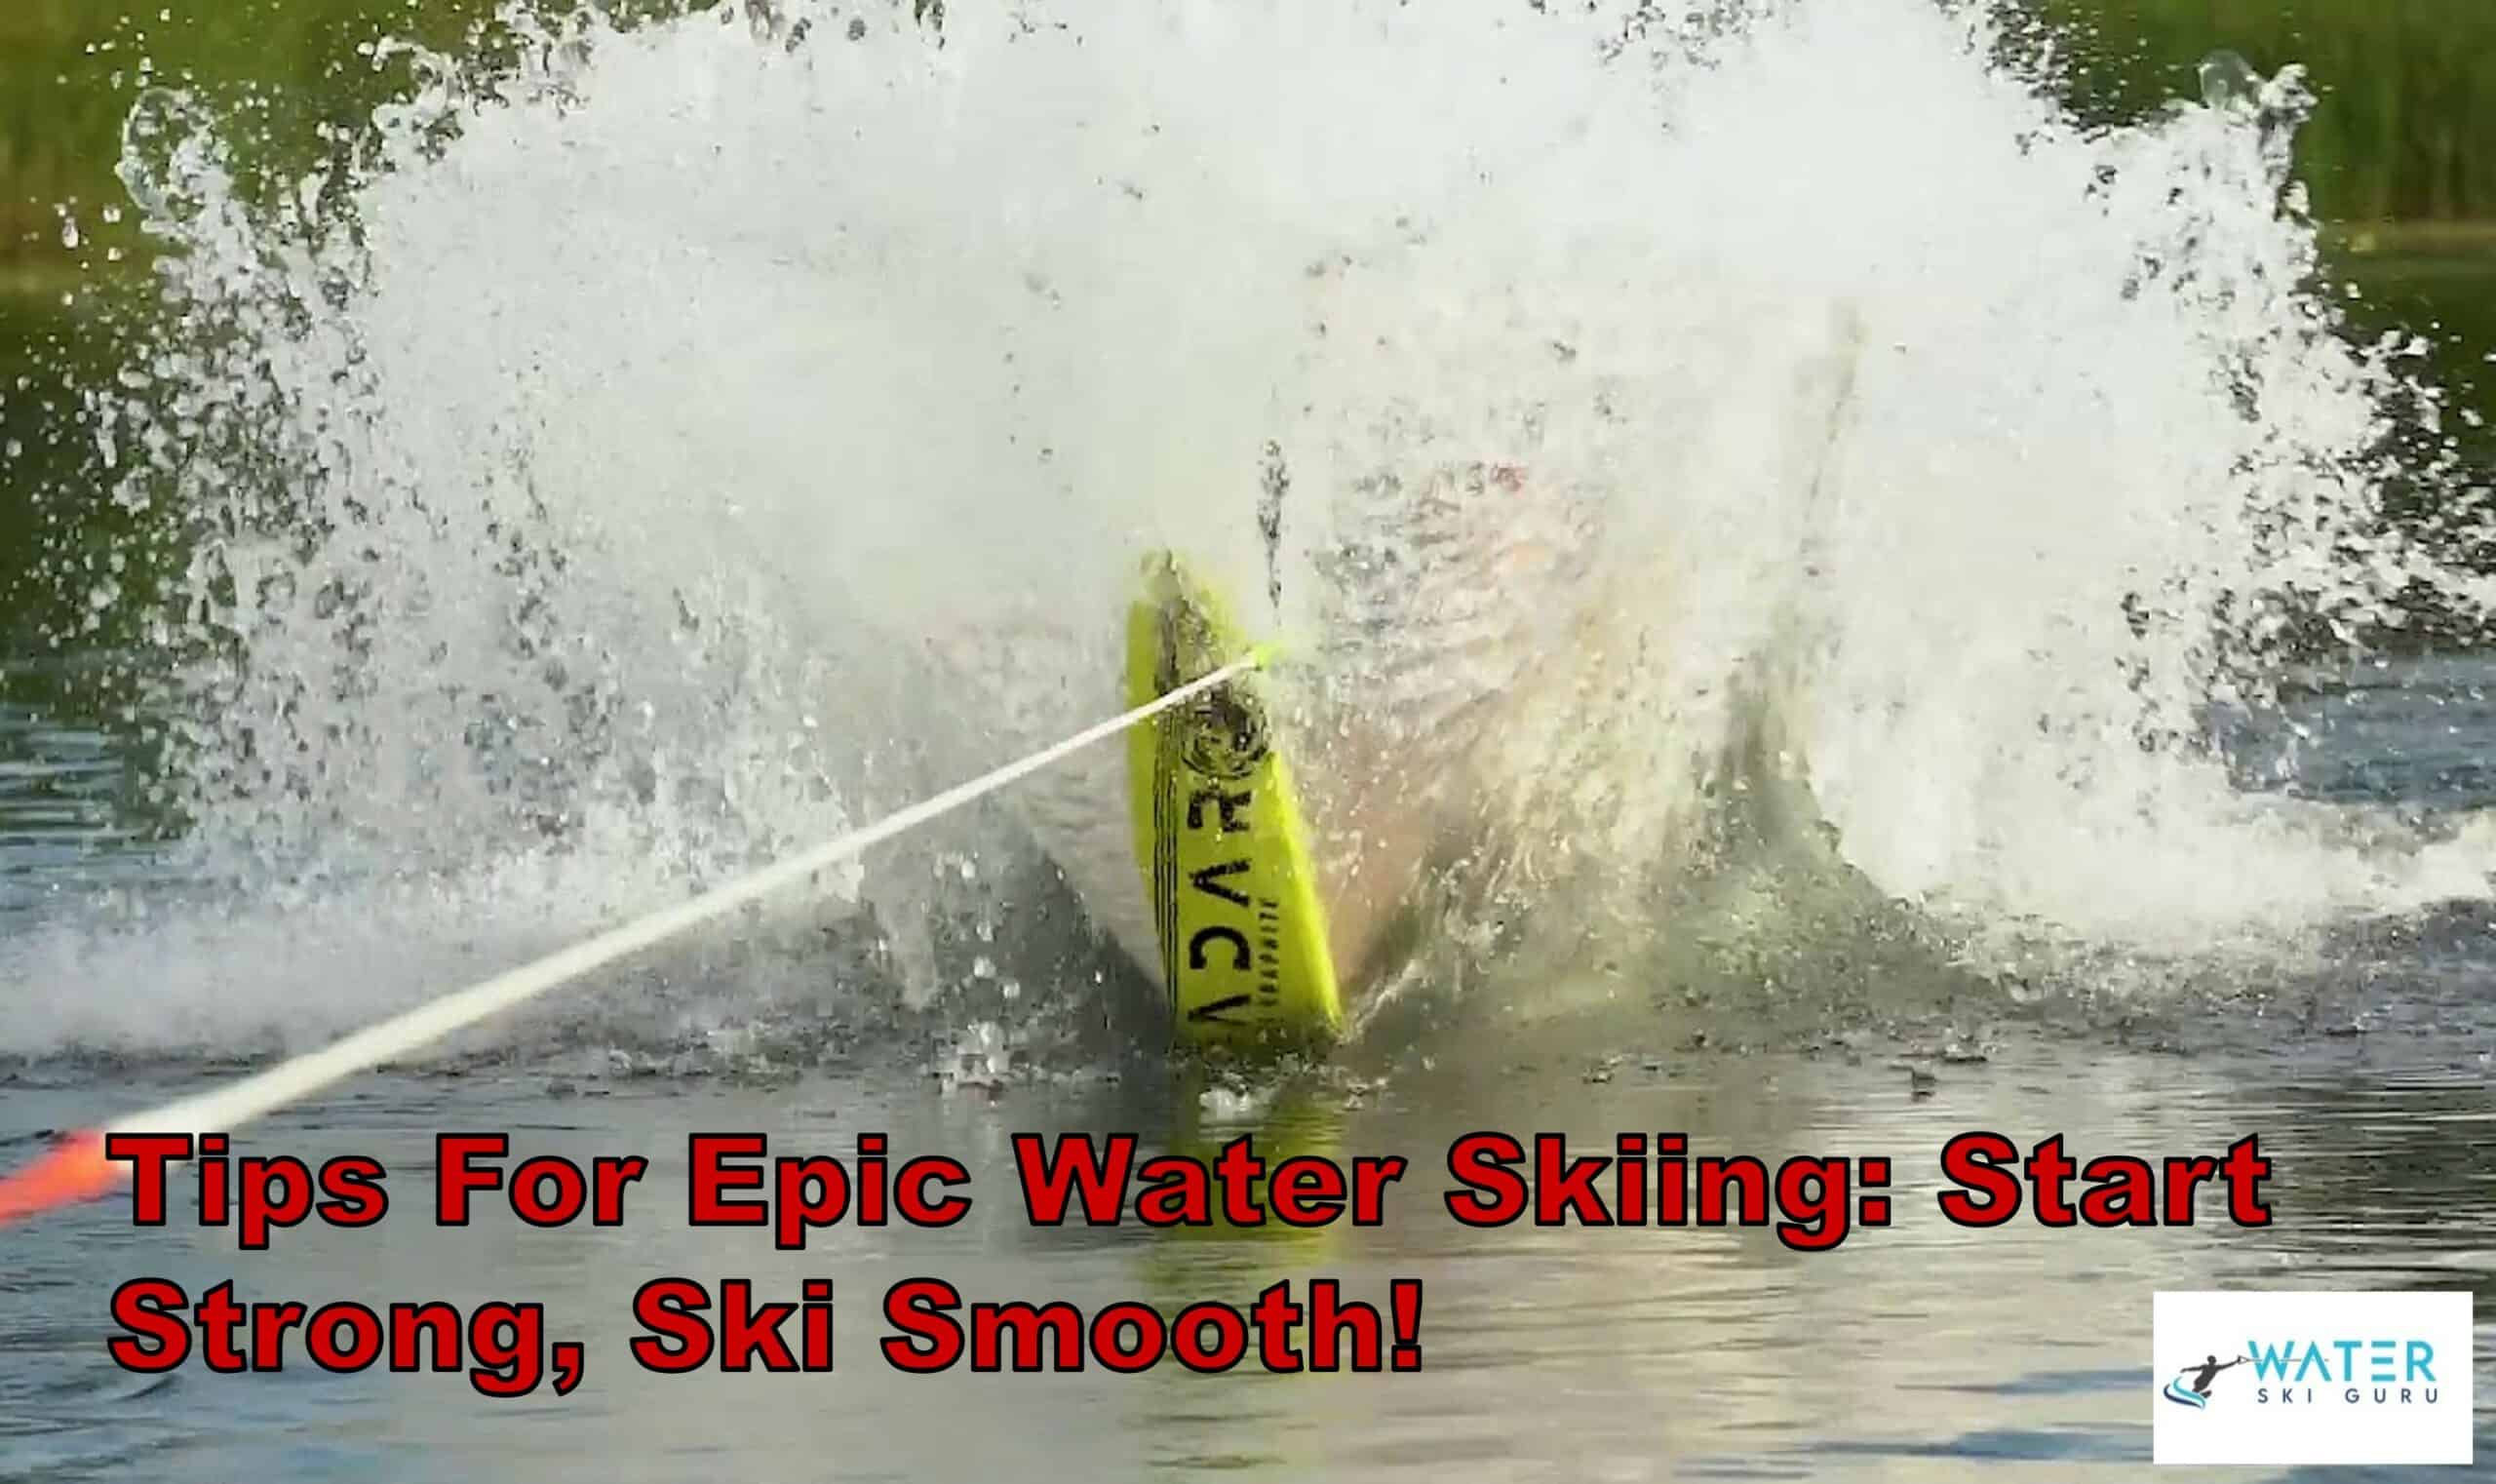 Tips For Epic Water Skiing: Start Strong, Ski Smooth!